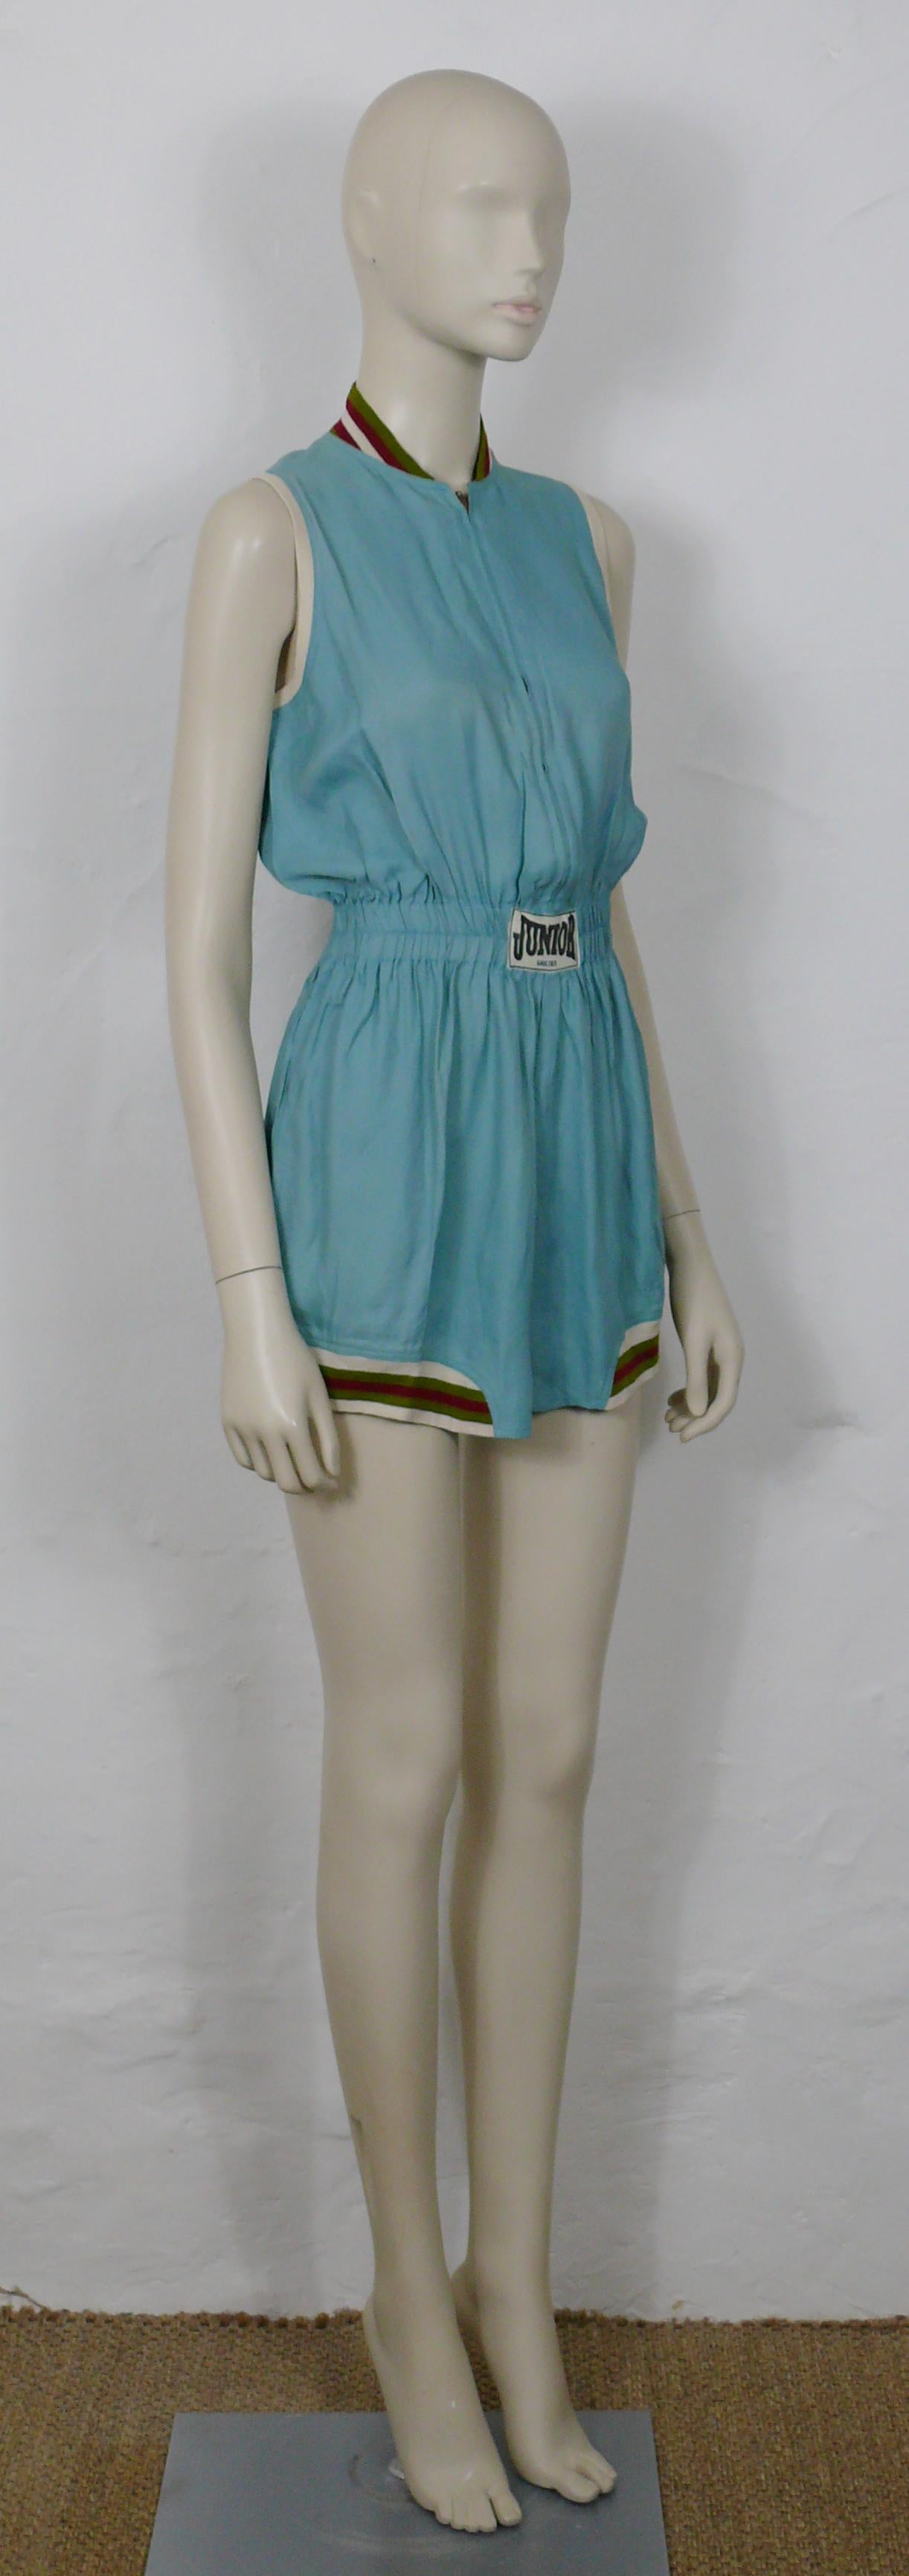 JEAN PAUL GAULTIER vintage rare 1990s turquoise blue shortall inspired by boxing outfits.

This shortall features :
- Turquoise blue viscose with multicolored knitted striped details on collar and thighs.
- Short sleeves.
- Short shorts.
- Elastic